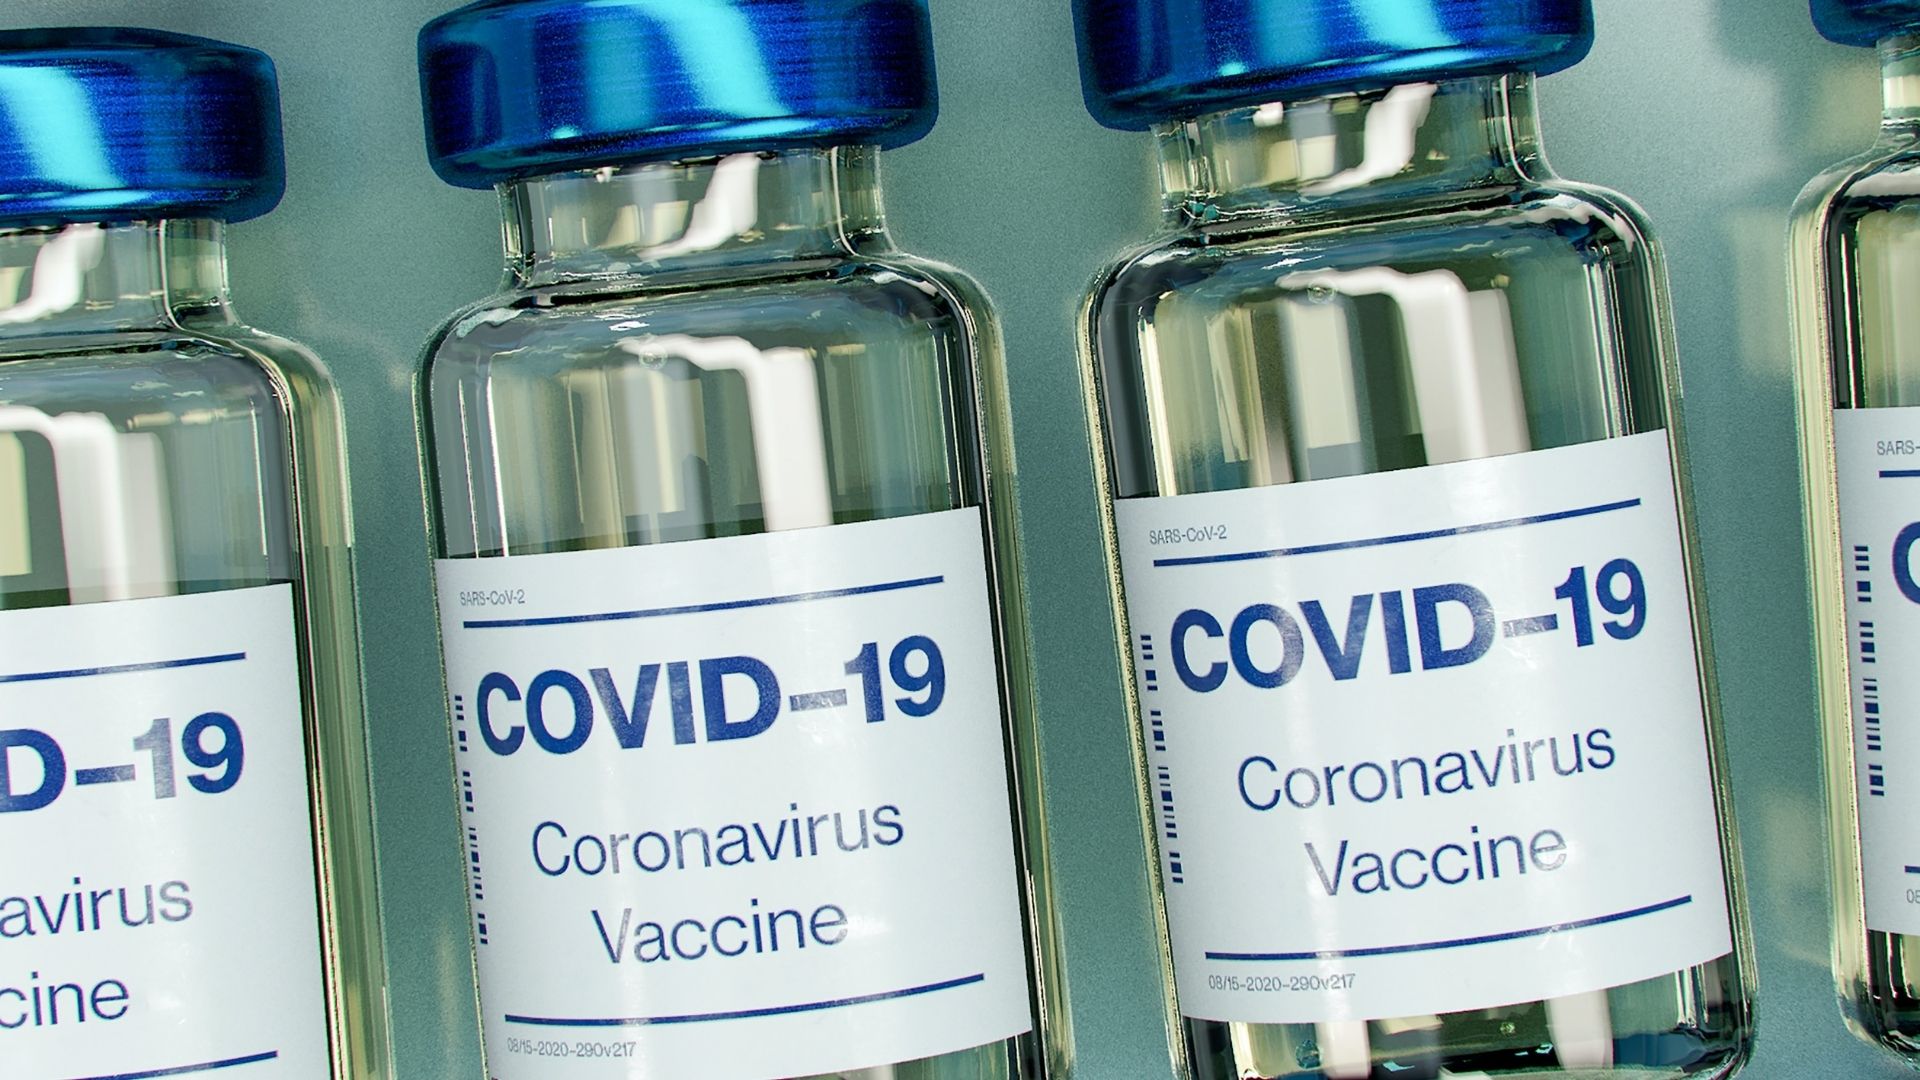 Health Equity in the Distribution of COVID-19 Vaccines Can Not Be Ignored